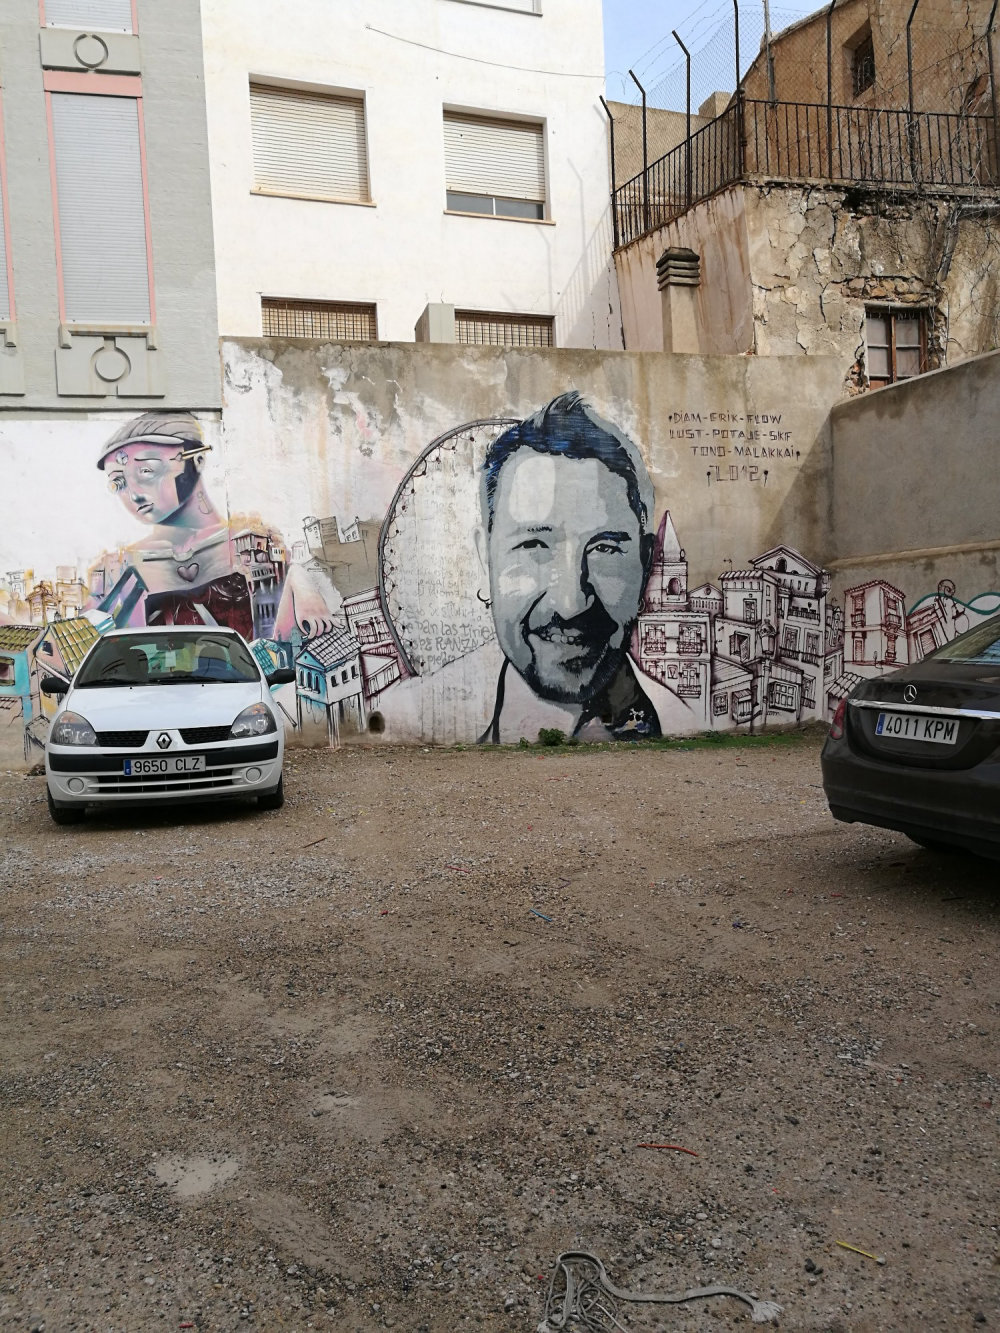 mural in Lorca by artist unknown.